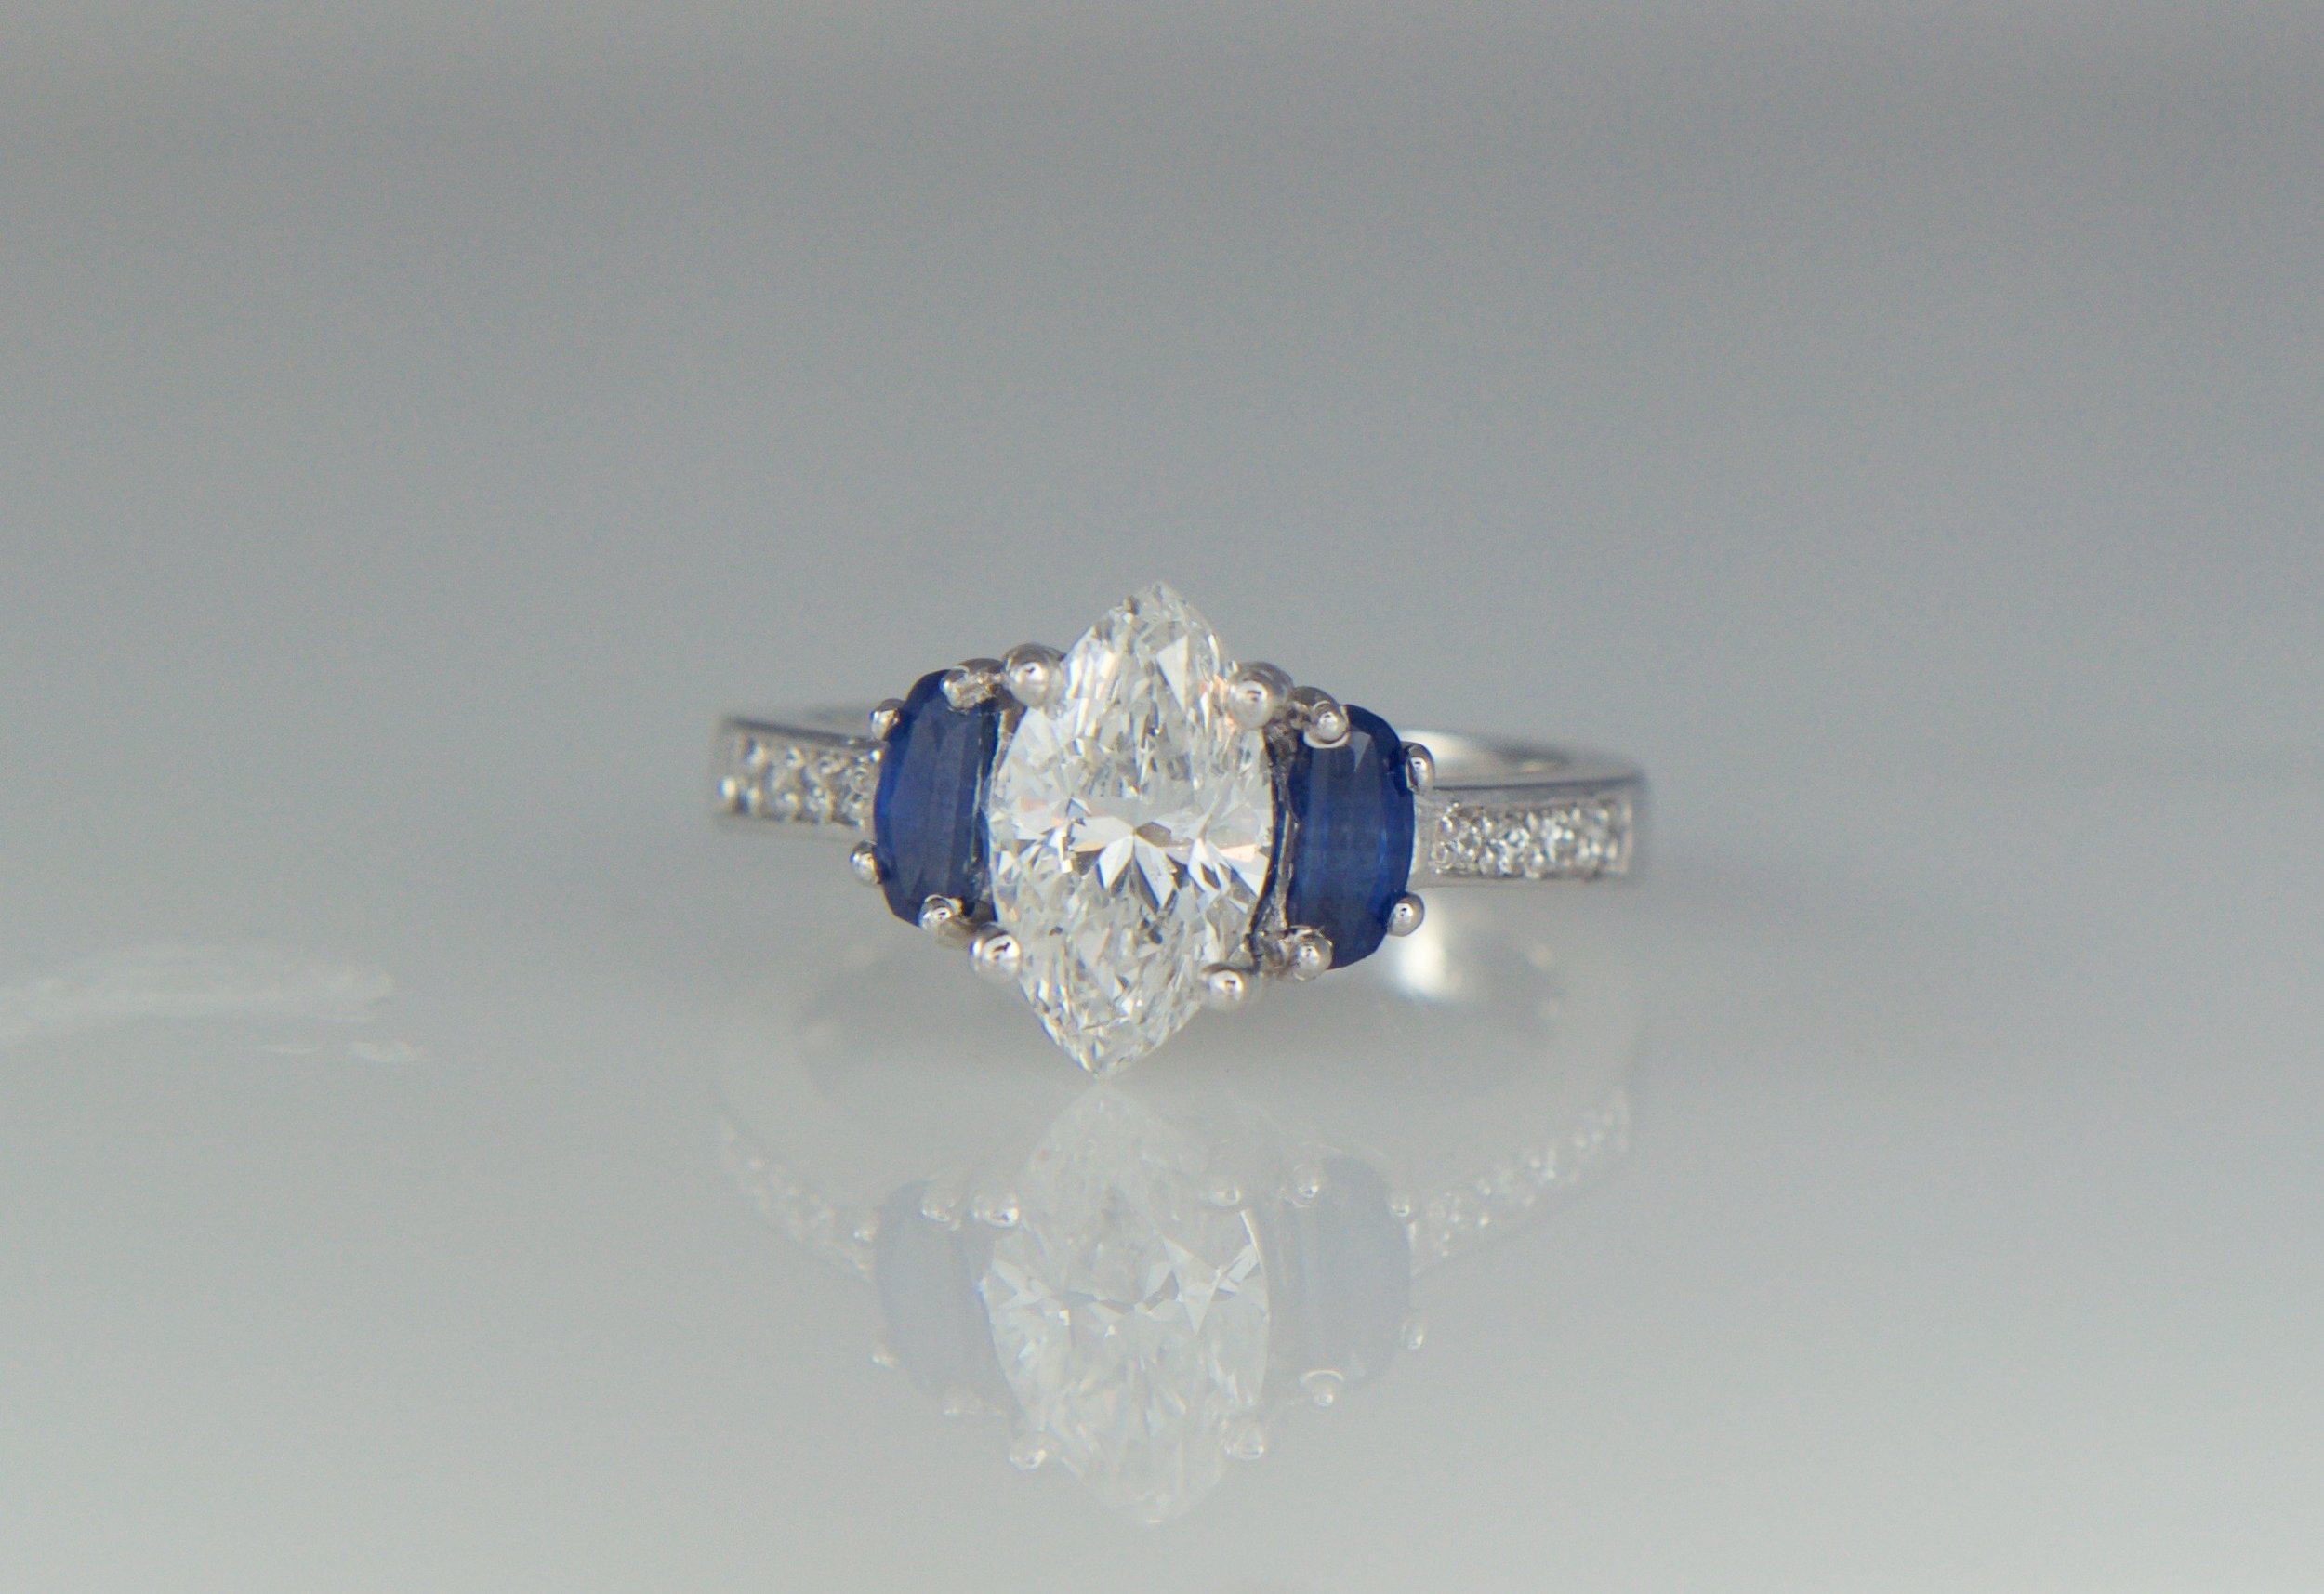 Marquis diamond engagement ring with sapphires